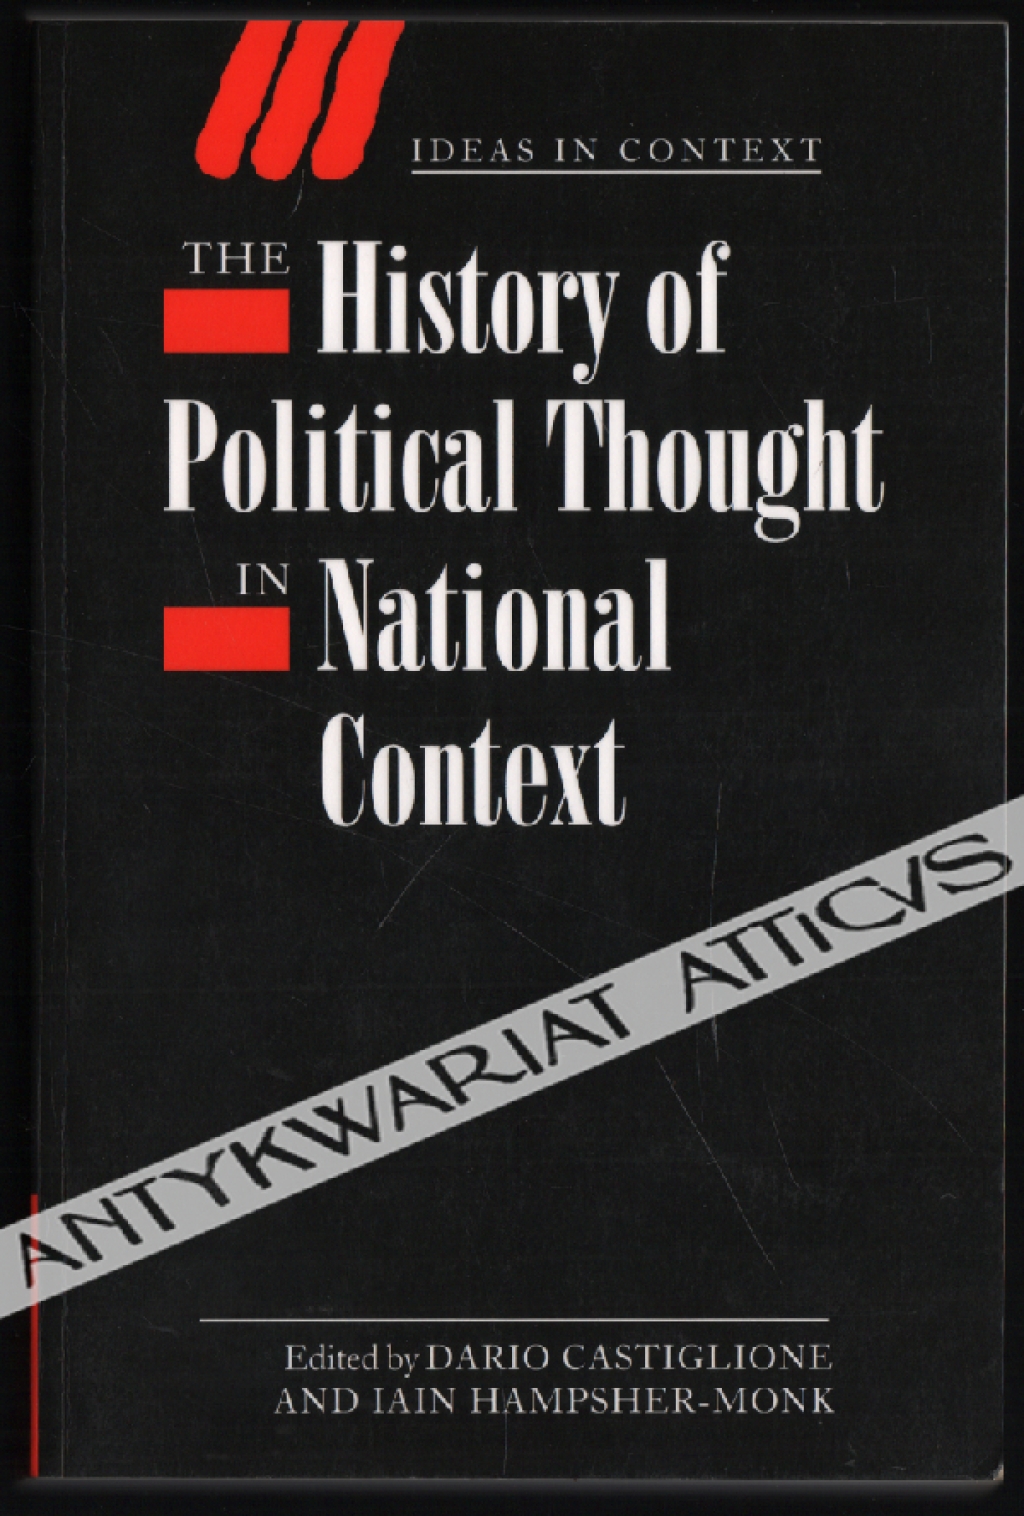 The History of Political Thought in National Context